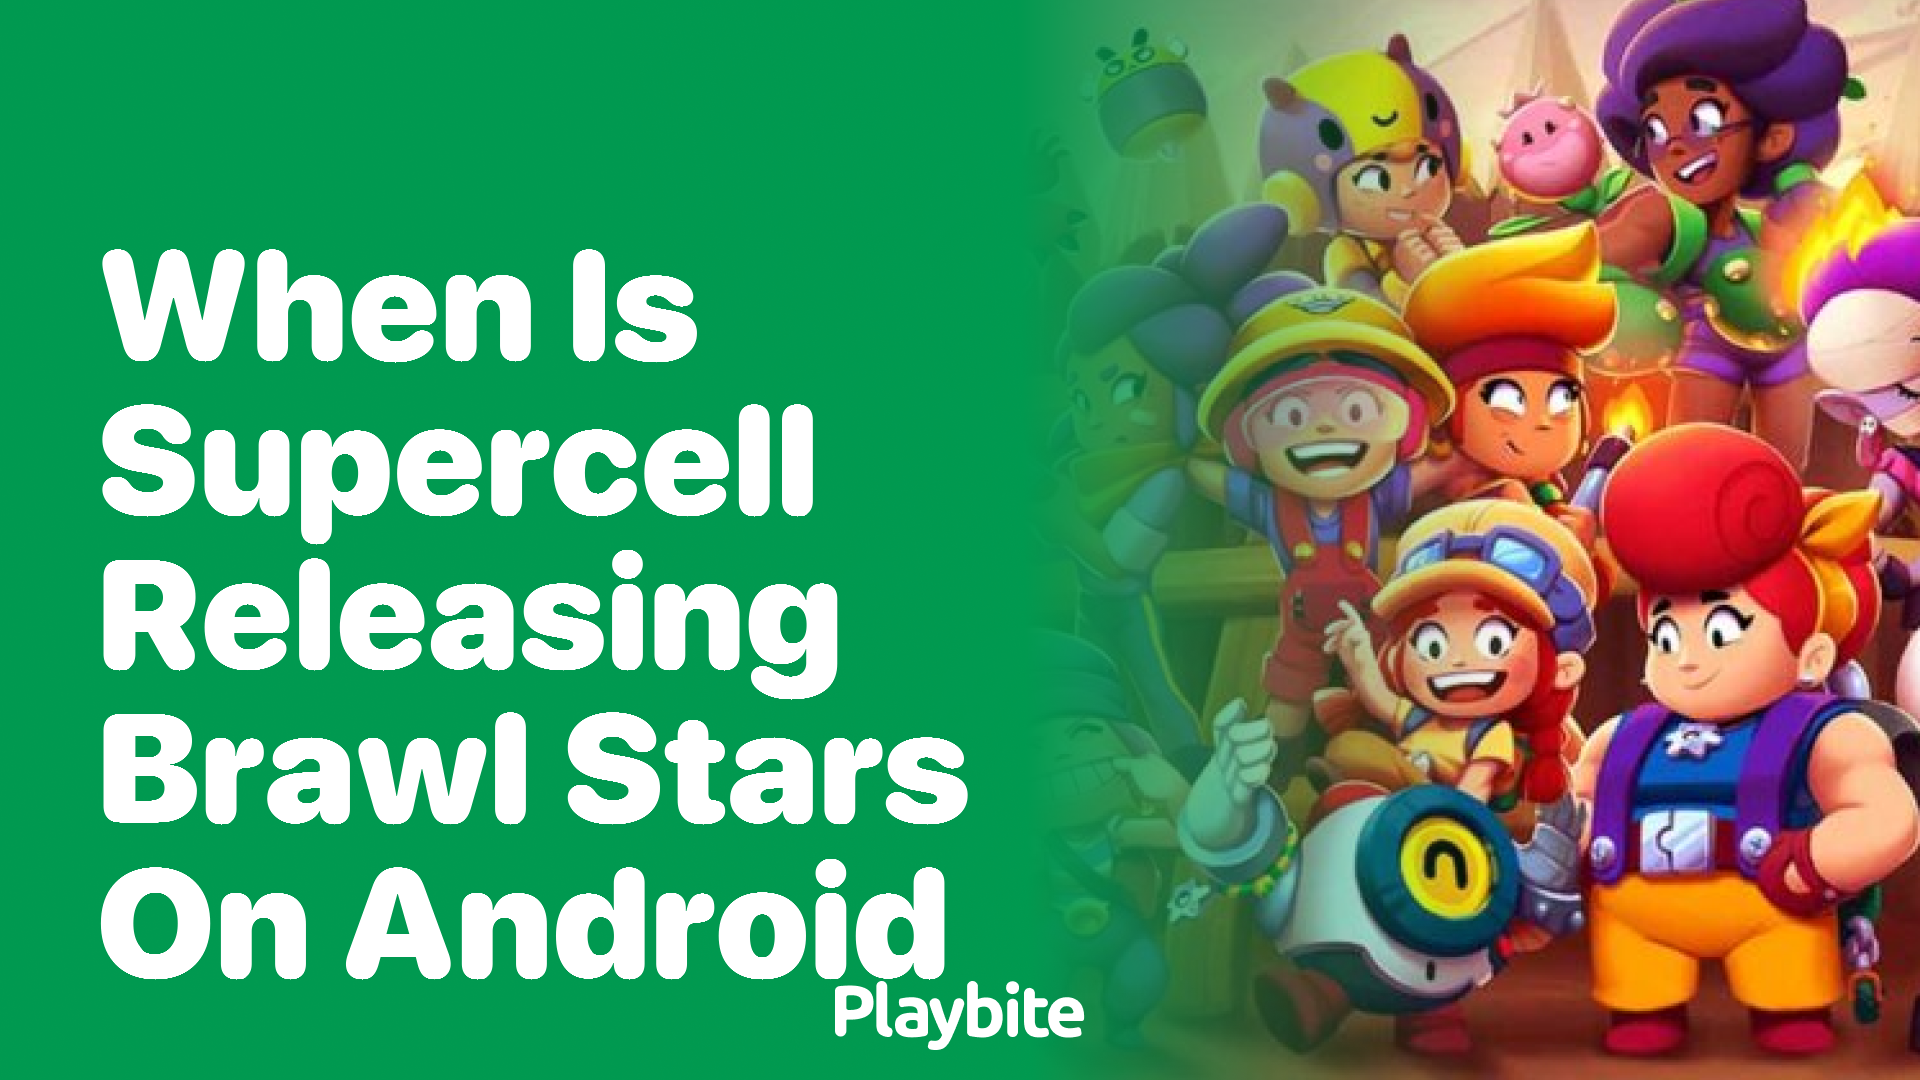 When is Supercell Releasing Brawl Stars on Android?